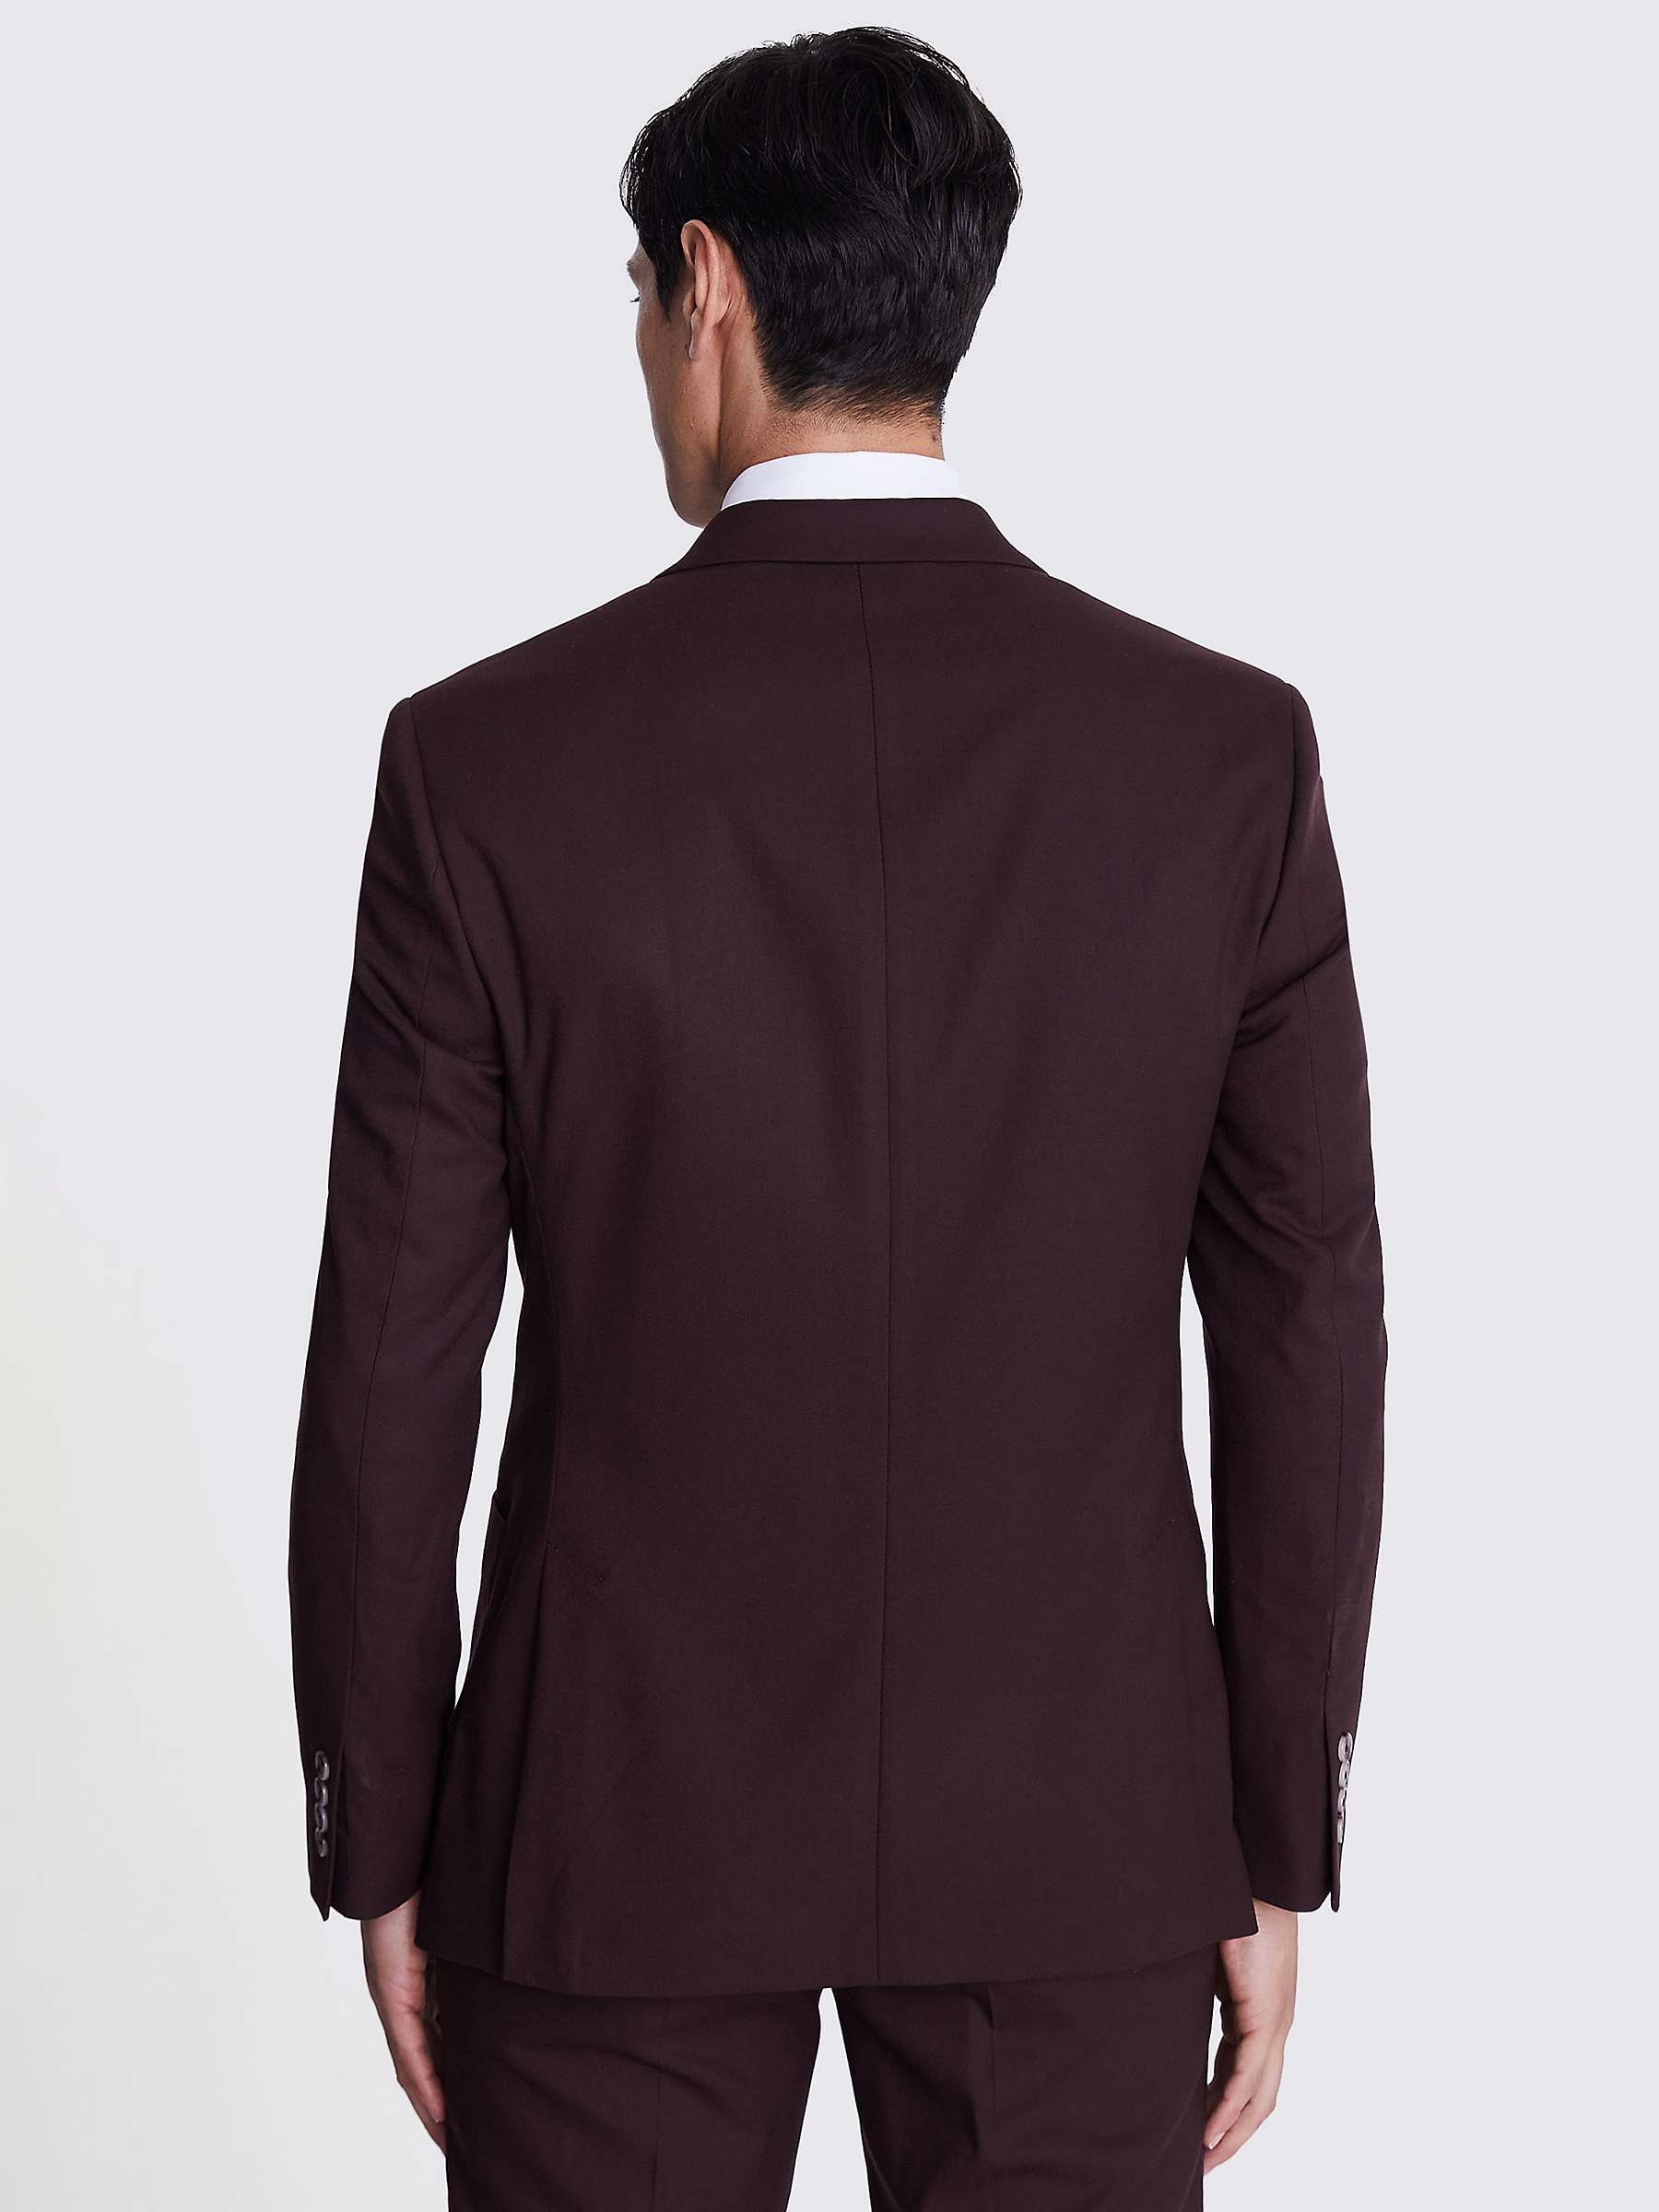 Buy Moss Tailored Fit Double Breasted Flannel Suit Jacket, Claret Online at johnlewis.com